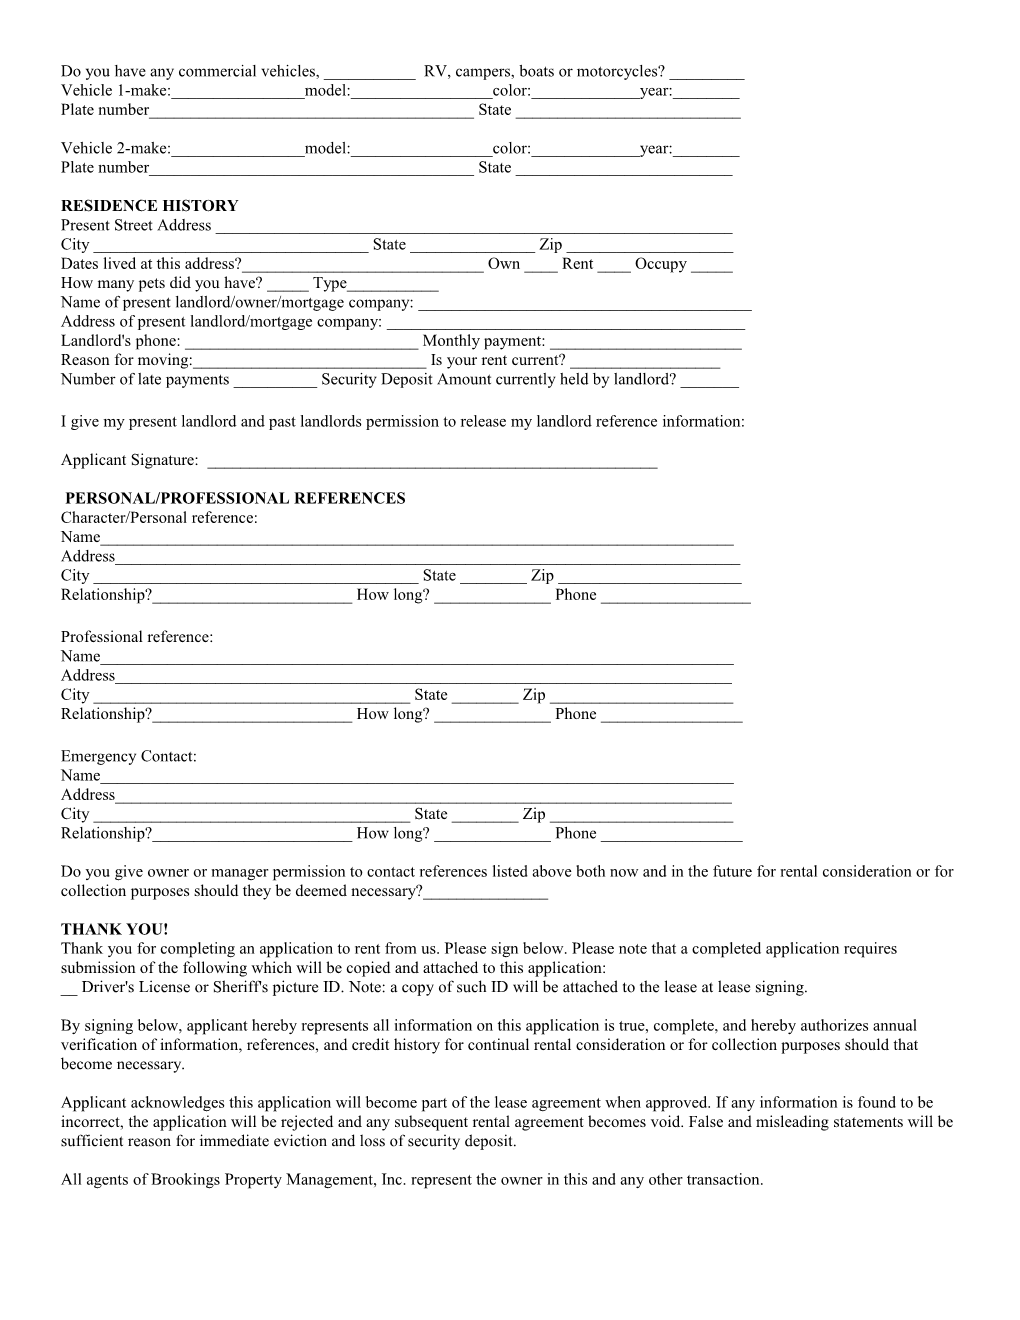 Instructions: Please Fill Out. Then SAVE. Email To